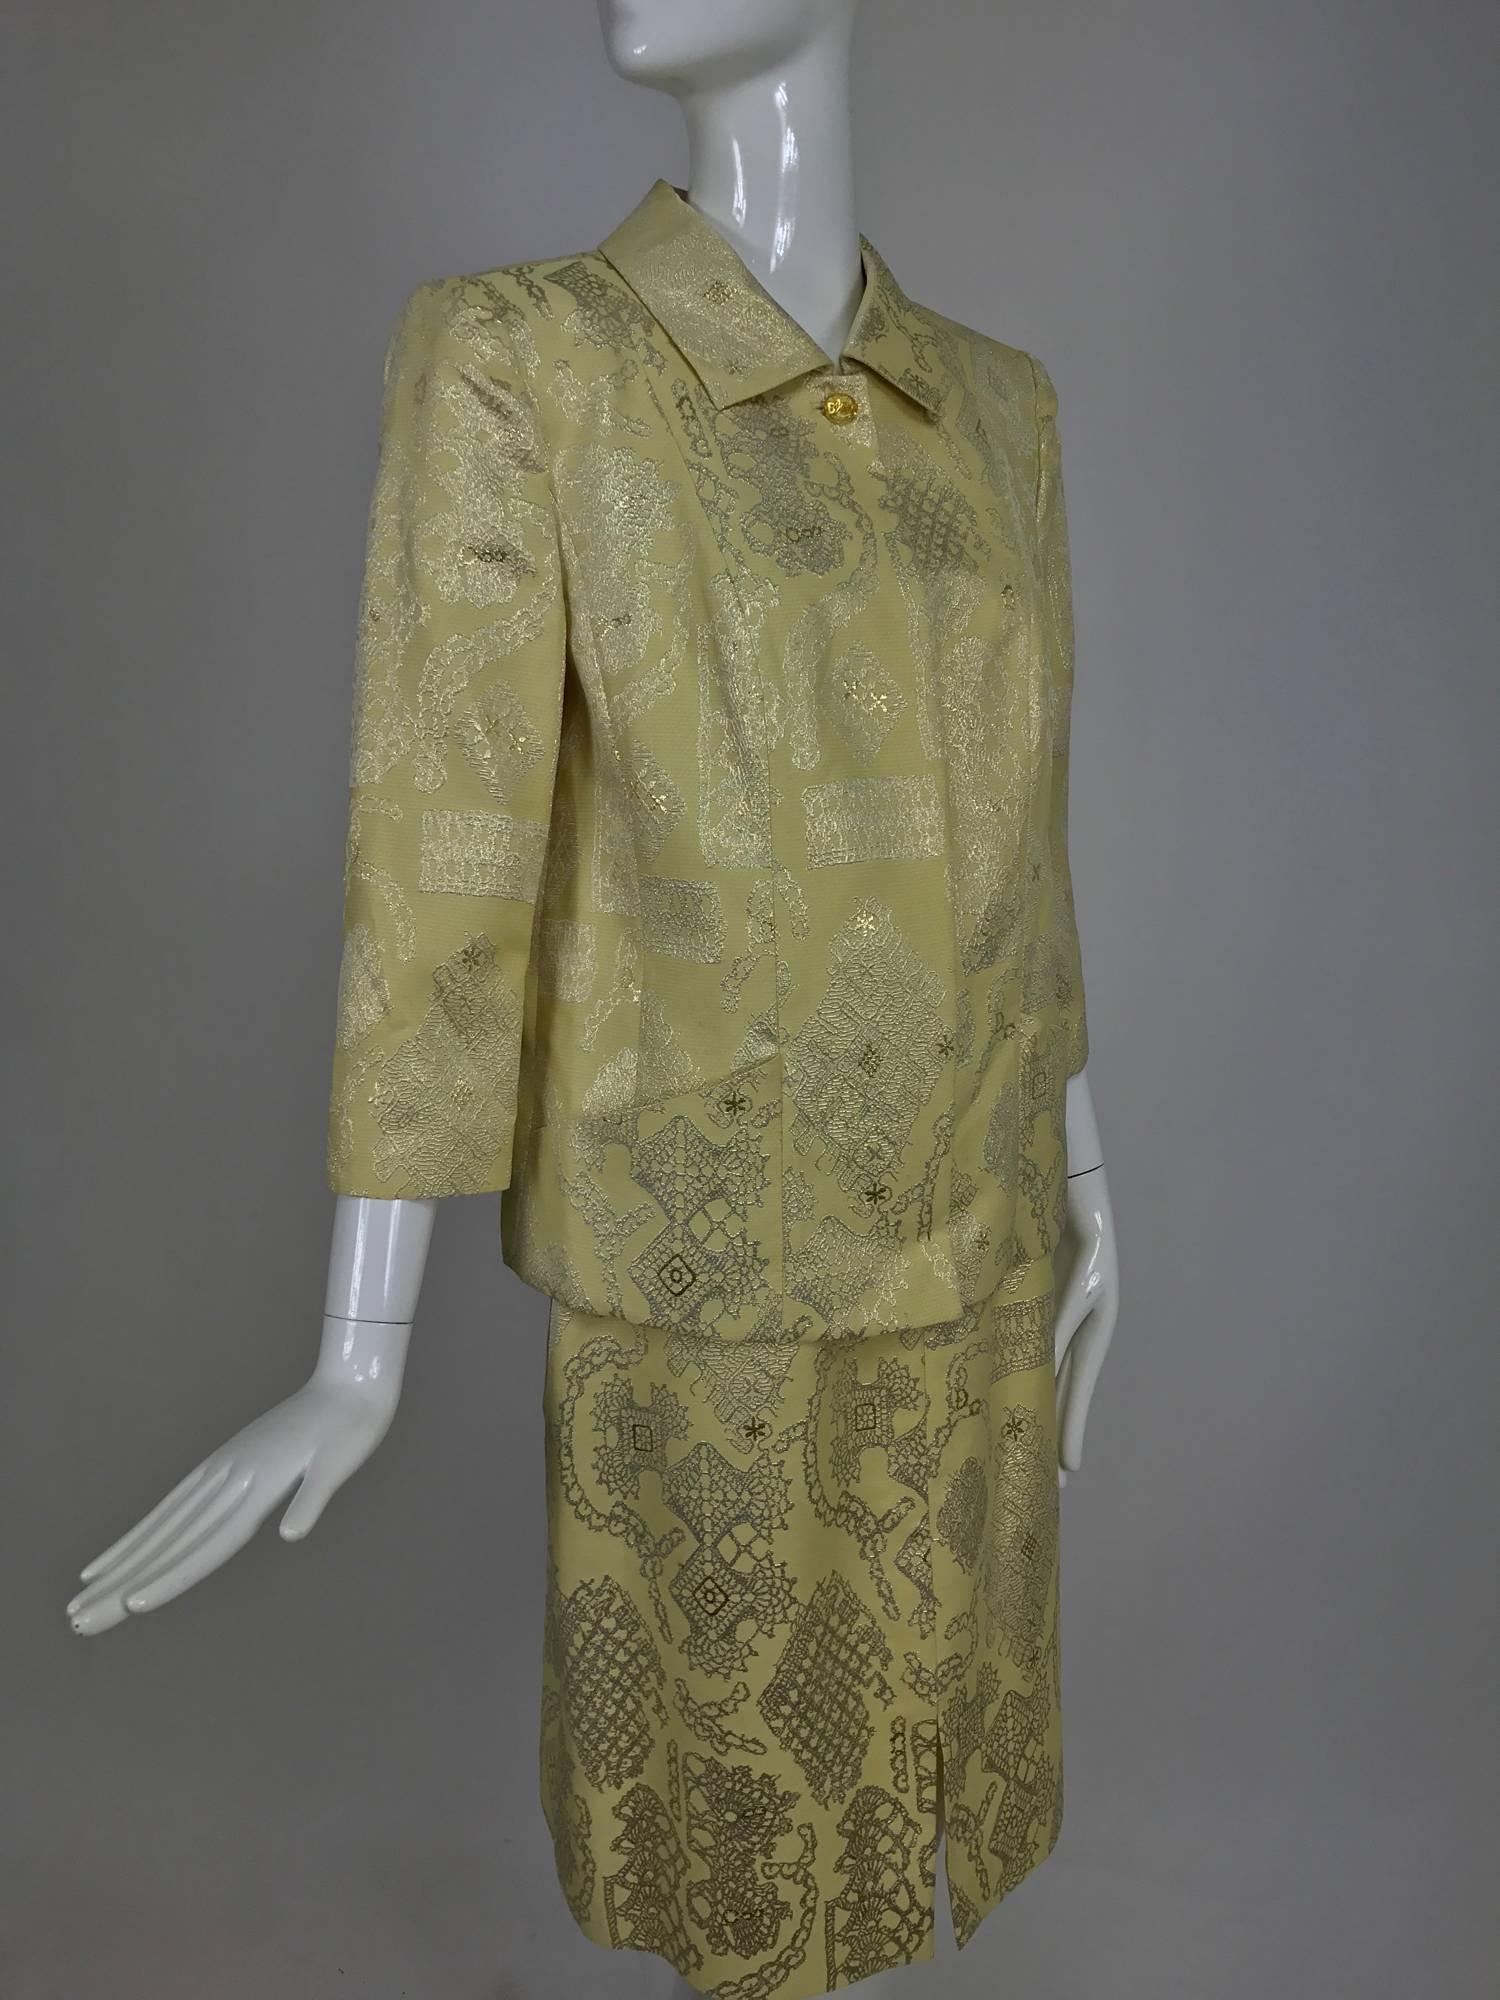 Vintage Christian LaCroix 2pc metallic brocade jacket and skirt 1980s...Yellow and silver brocade, the jacket is loose fitting with 3/4 length sleeves that have a vent at the cuff...Closes at the neck with a single button that is clear yellow